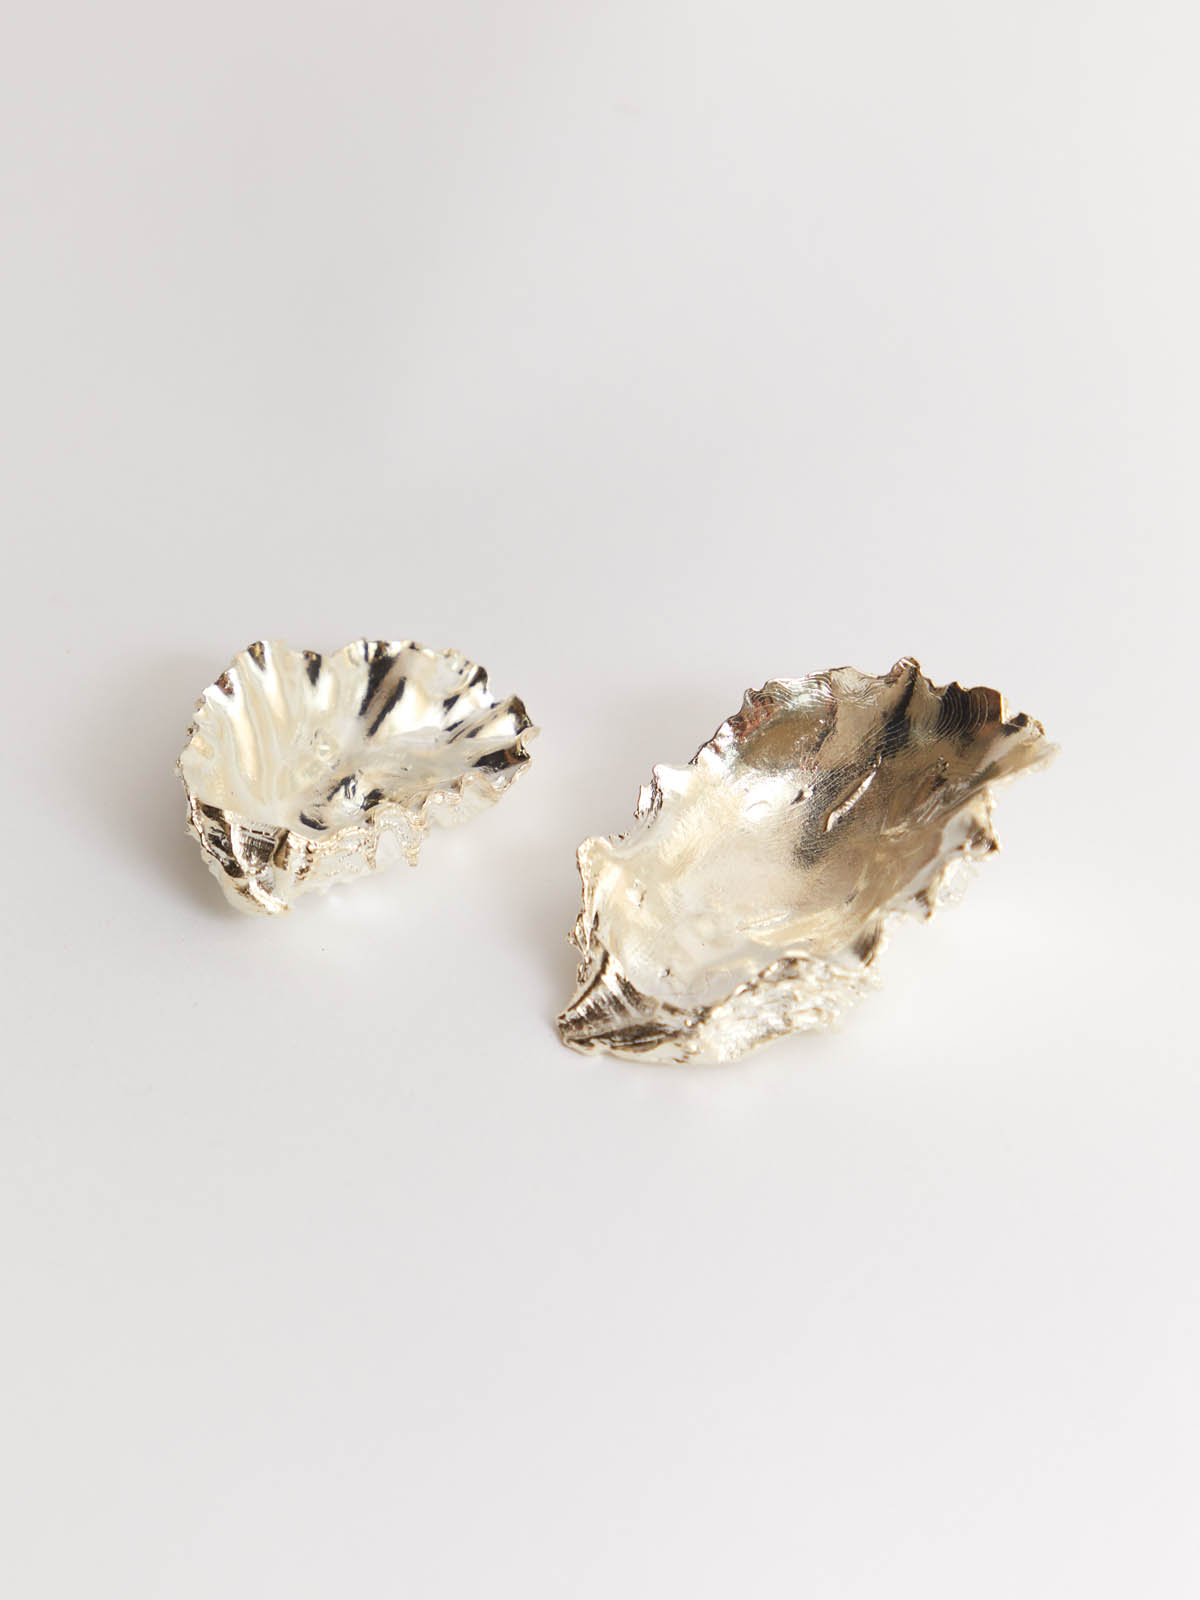 Silver & White Bronze Oyster Shell by Leiger image of Small and Large on white background